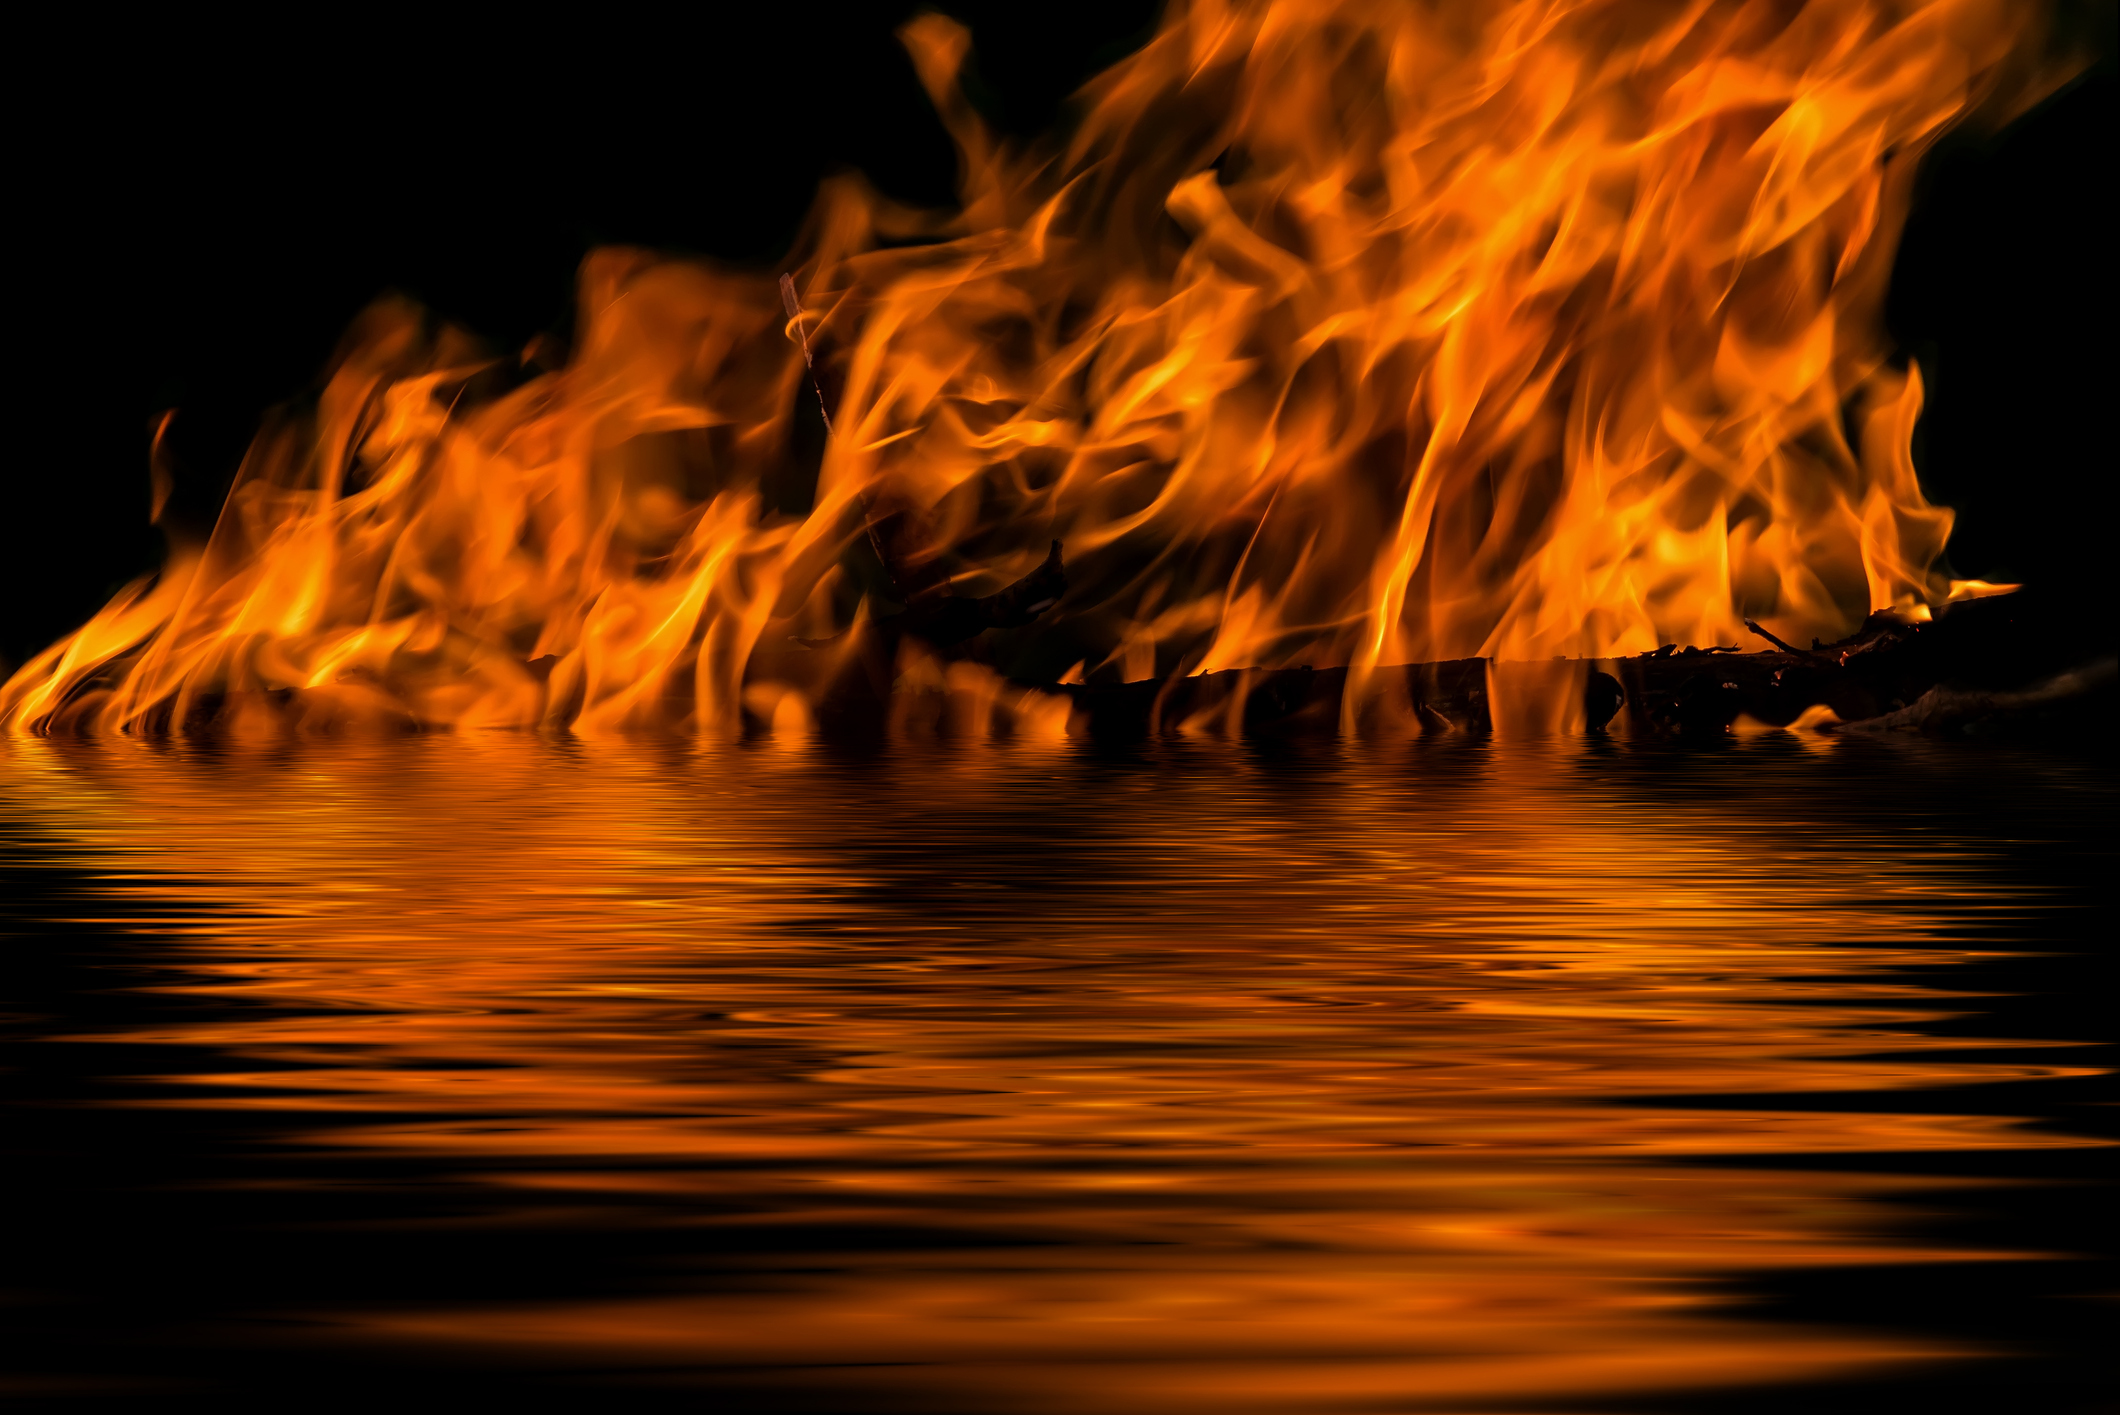 flame fire water reflection